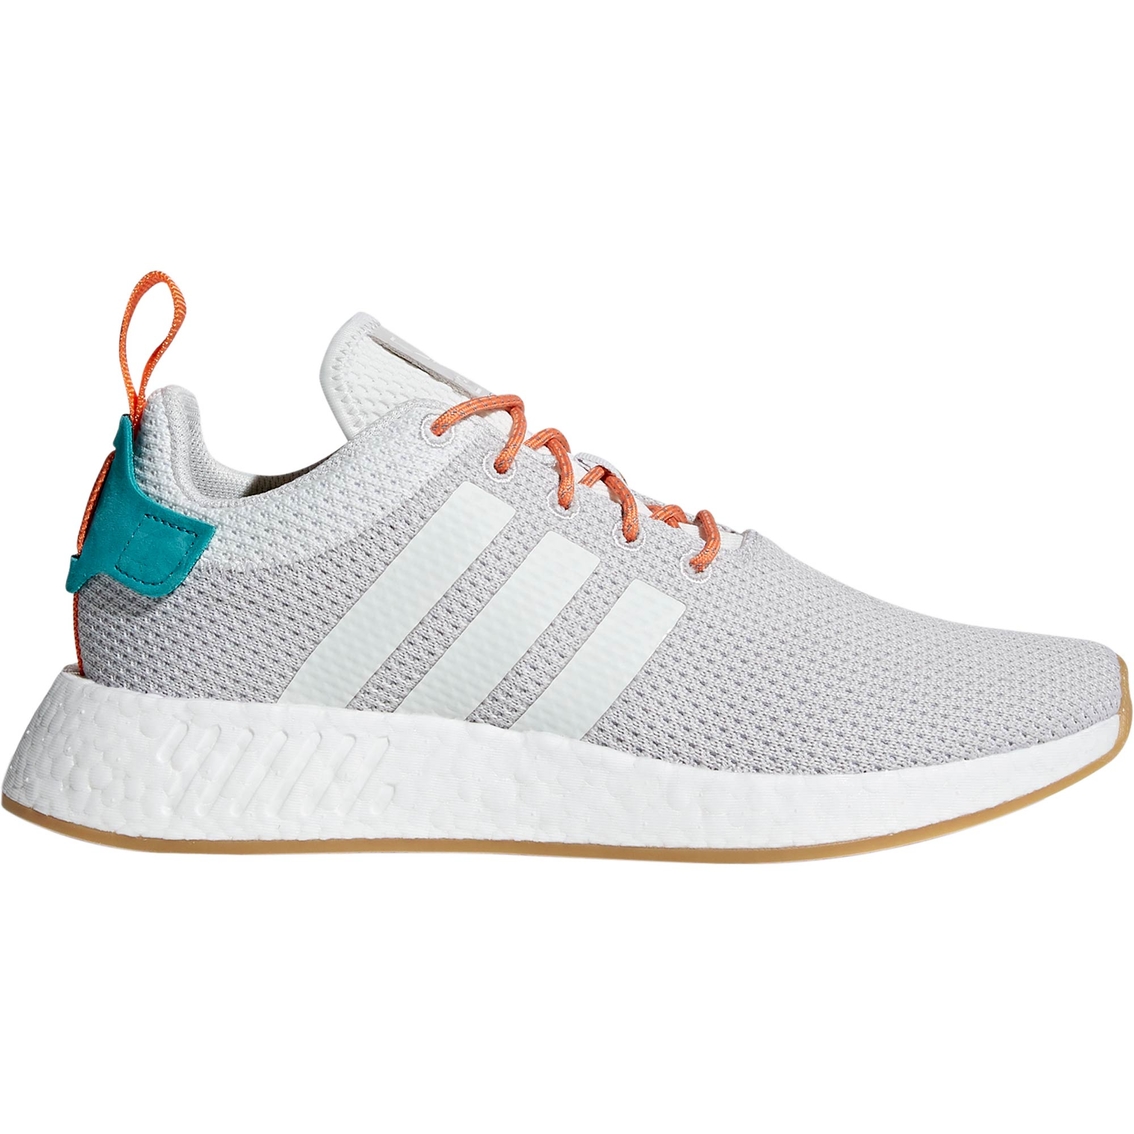 Adidas Men's Nmd Rd 2 Running Shoes 